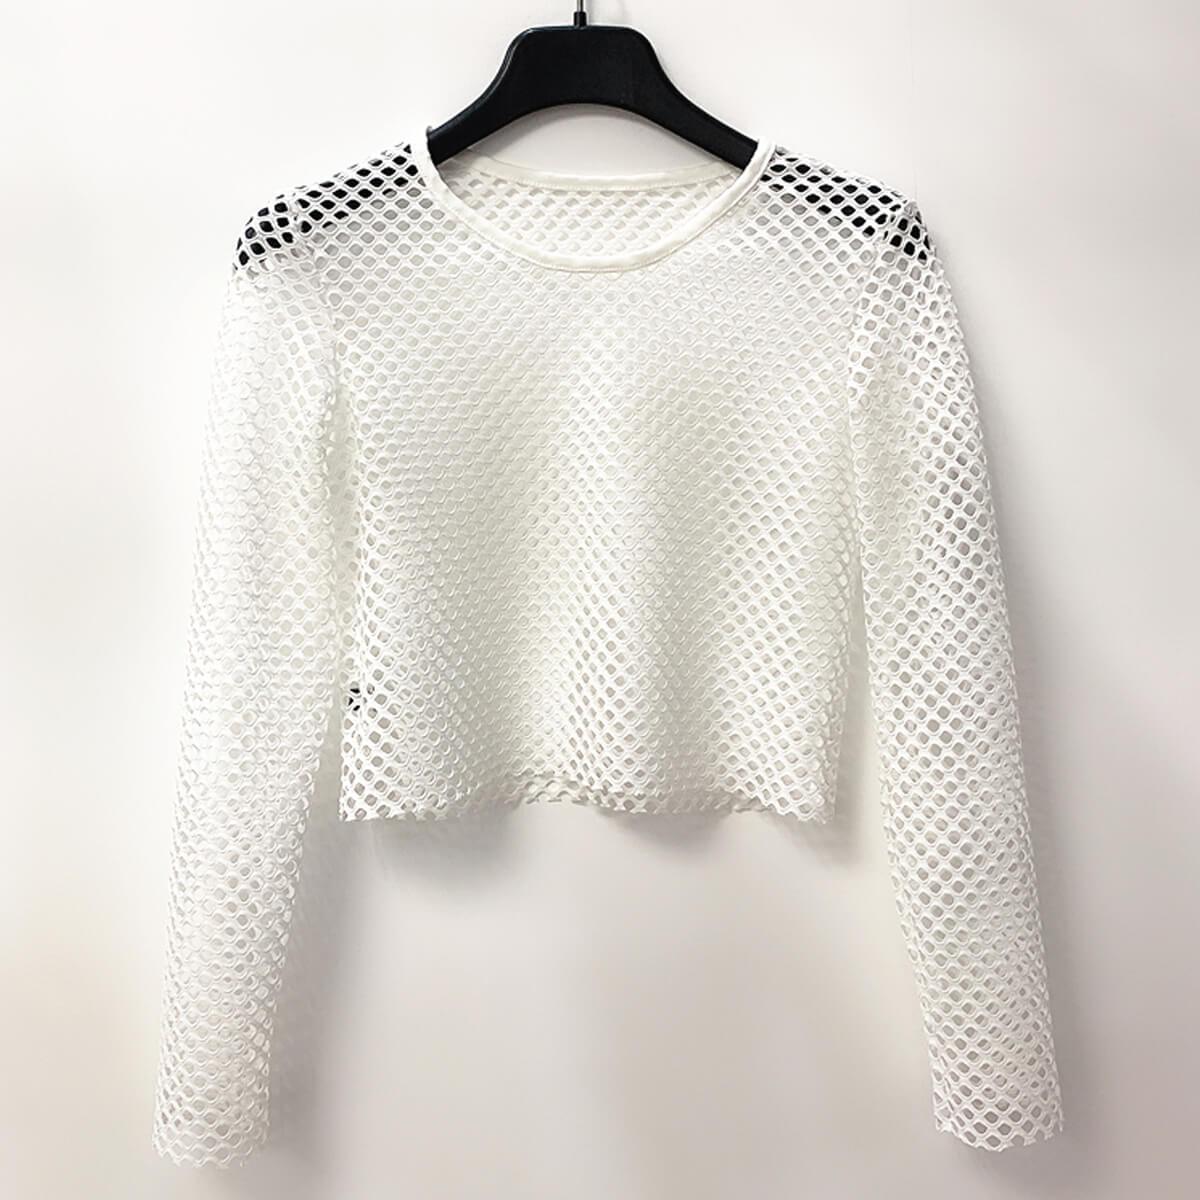 Long Sleeve Neon Fishnet Top - Aesthetic Clothes Shop